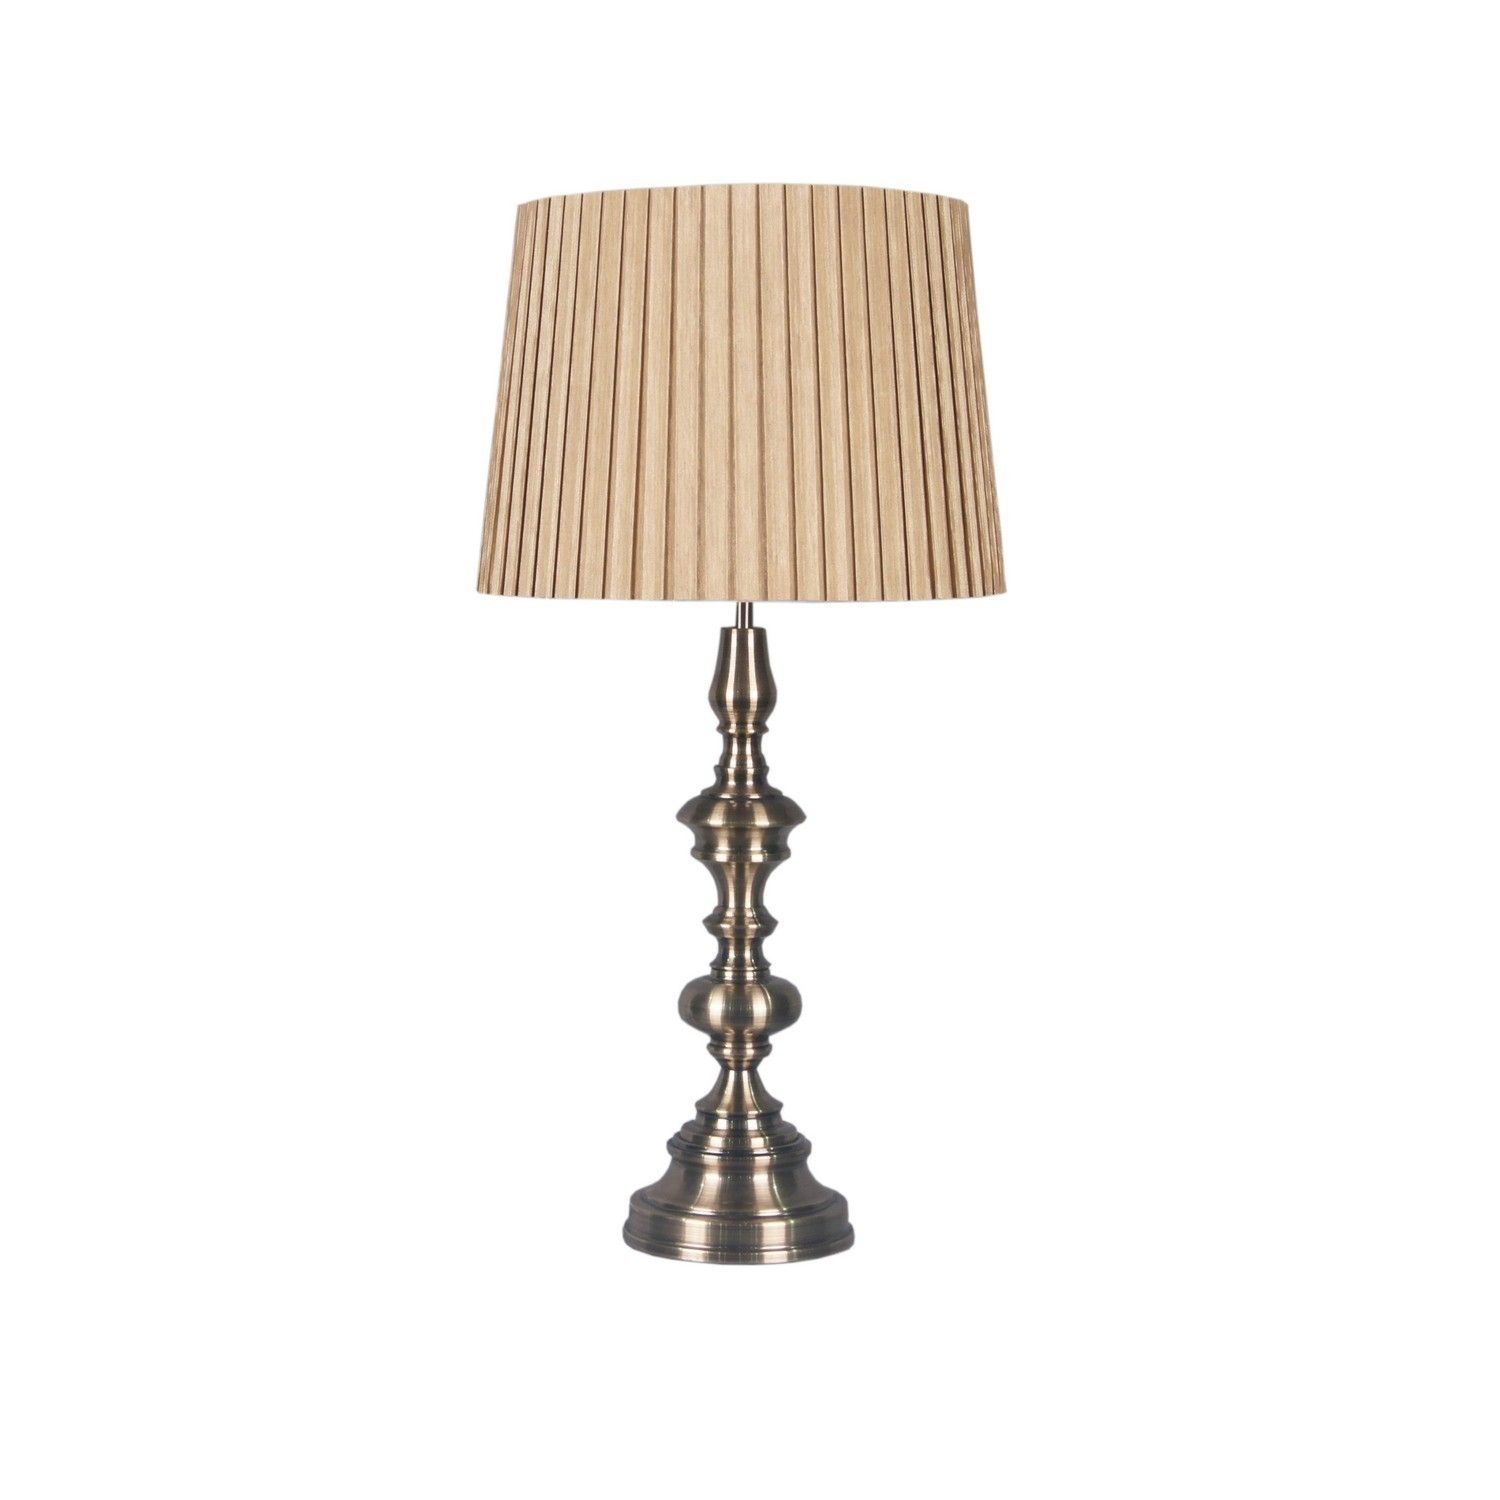 Light : Tiffany Table Lamp Shade Replacements Floor Shades Only John Throughout John Lewis Living Room Table Lamps (View 9 of 15)